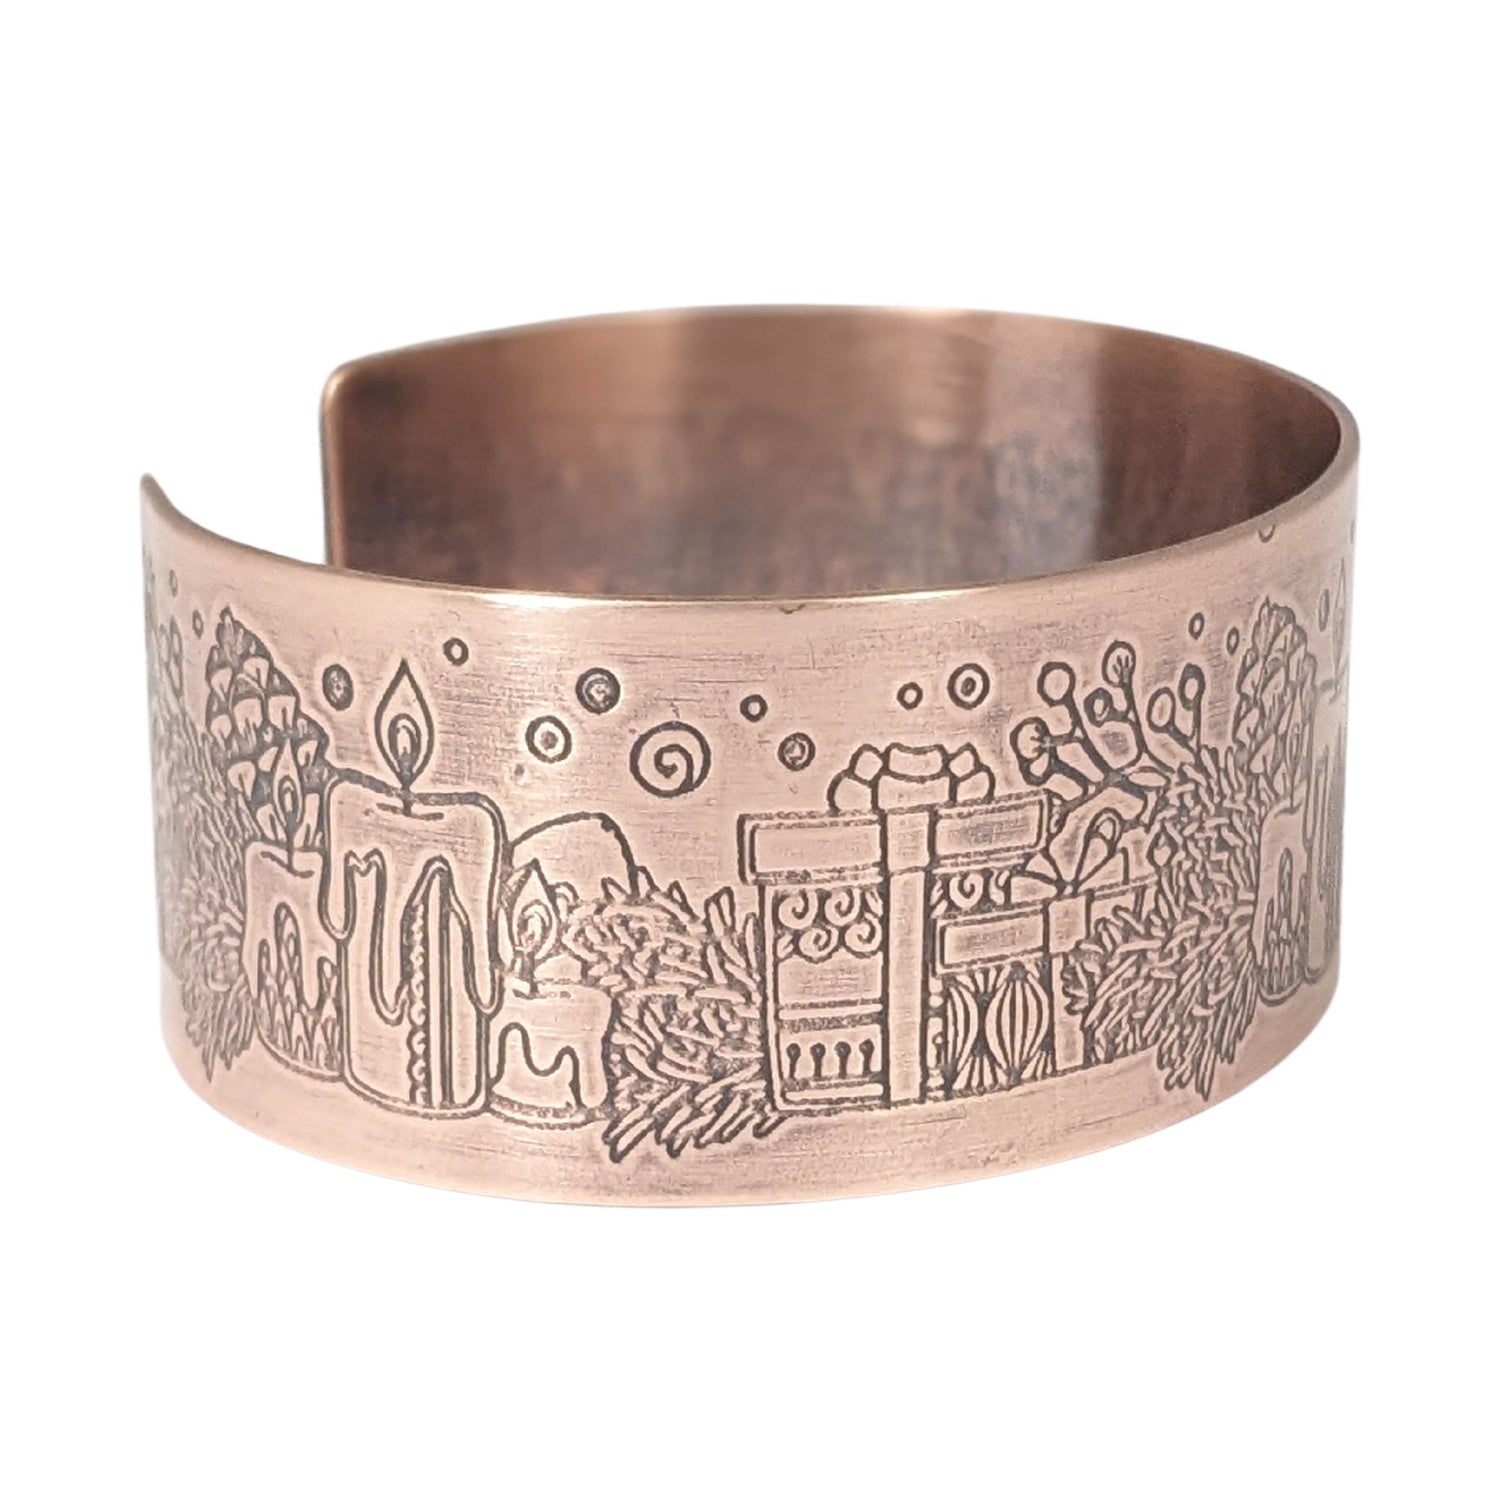 copper cuff bracelet with a christmas theme. the cuff is covered in impressions of candles, wrapped gifts, and evergreens